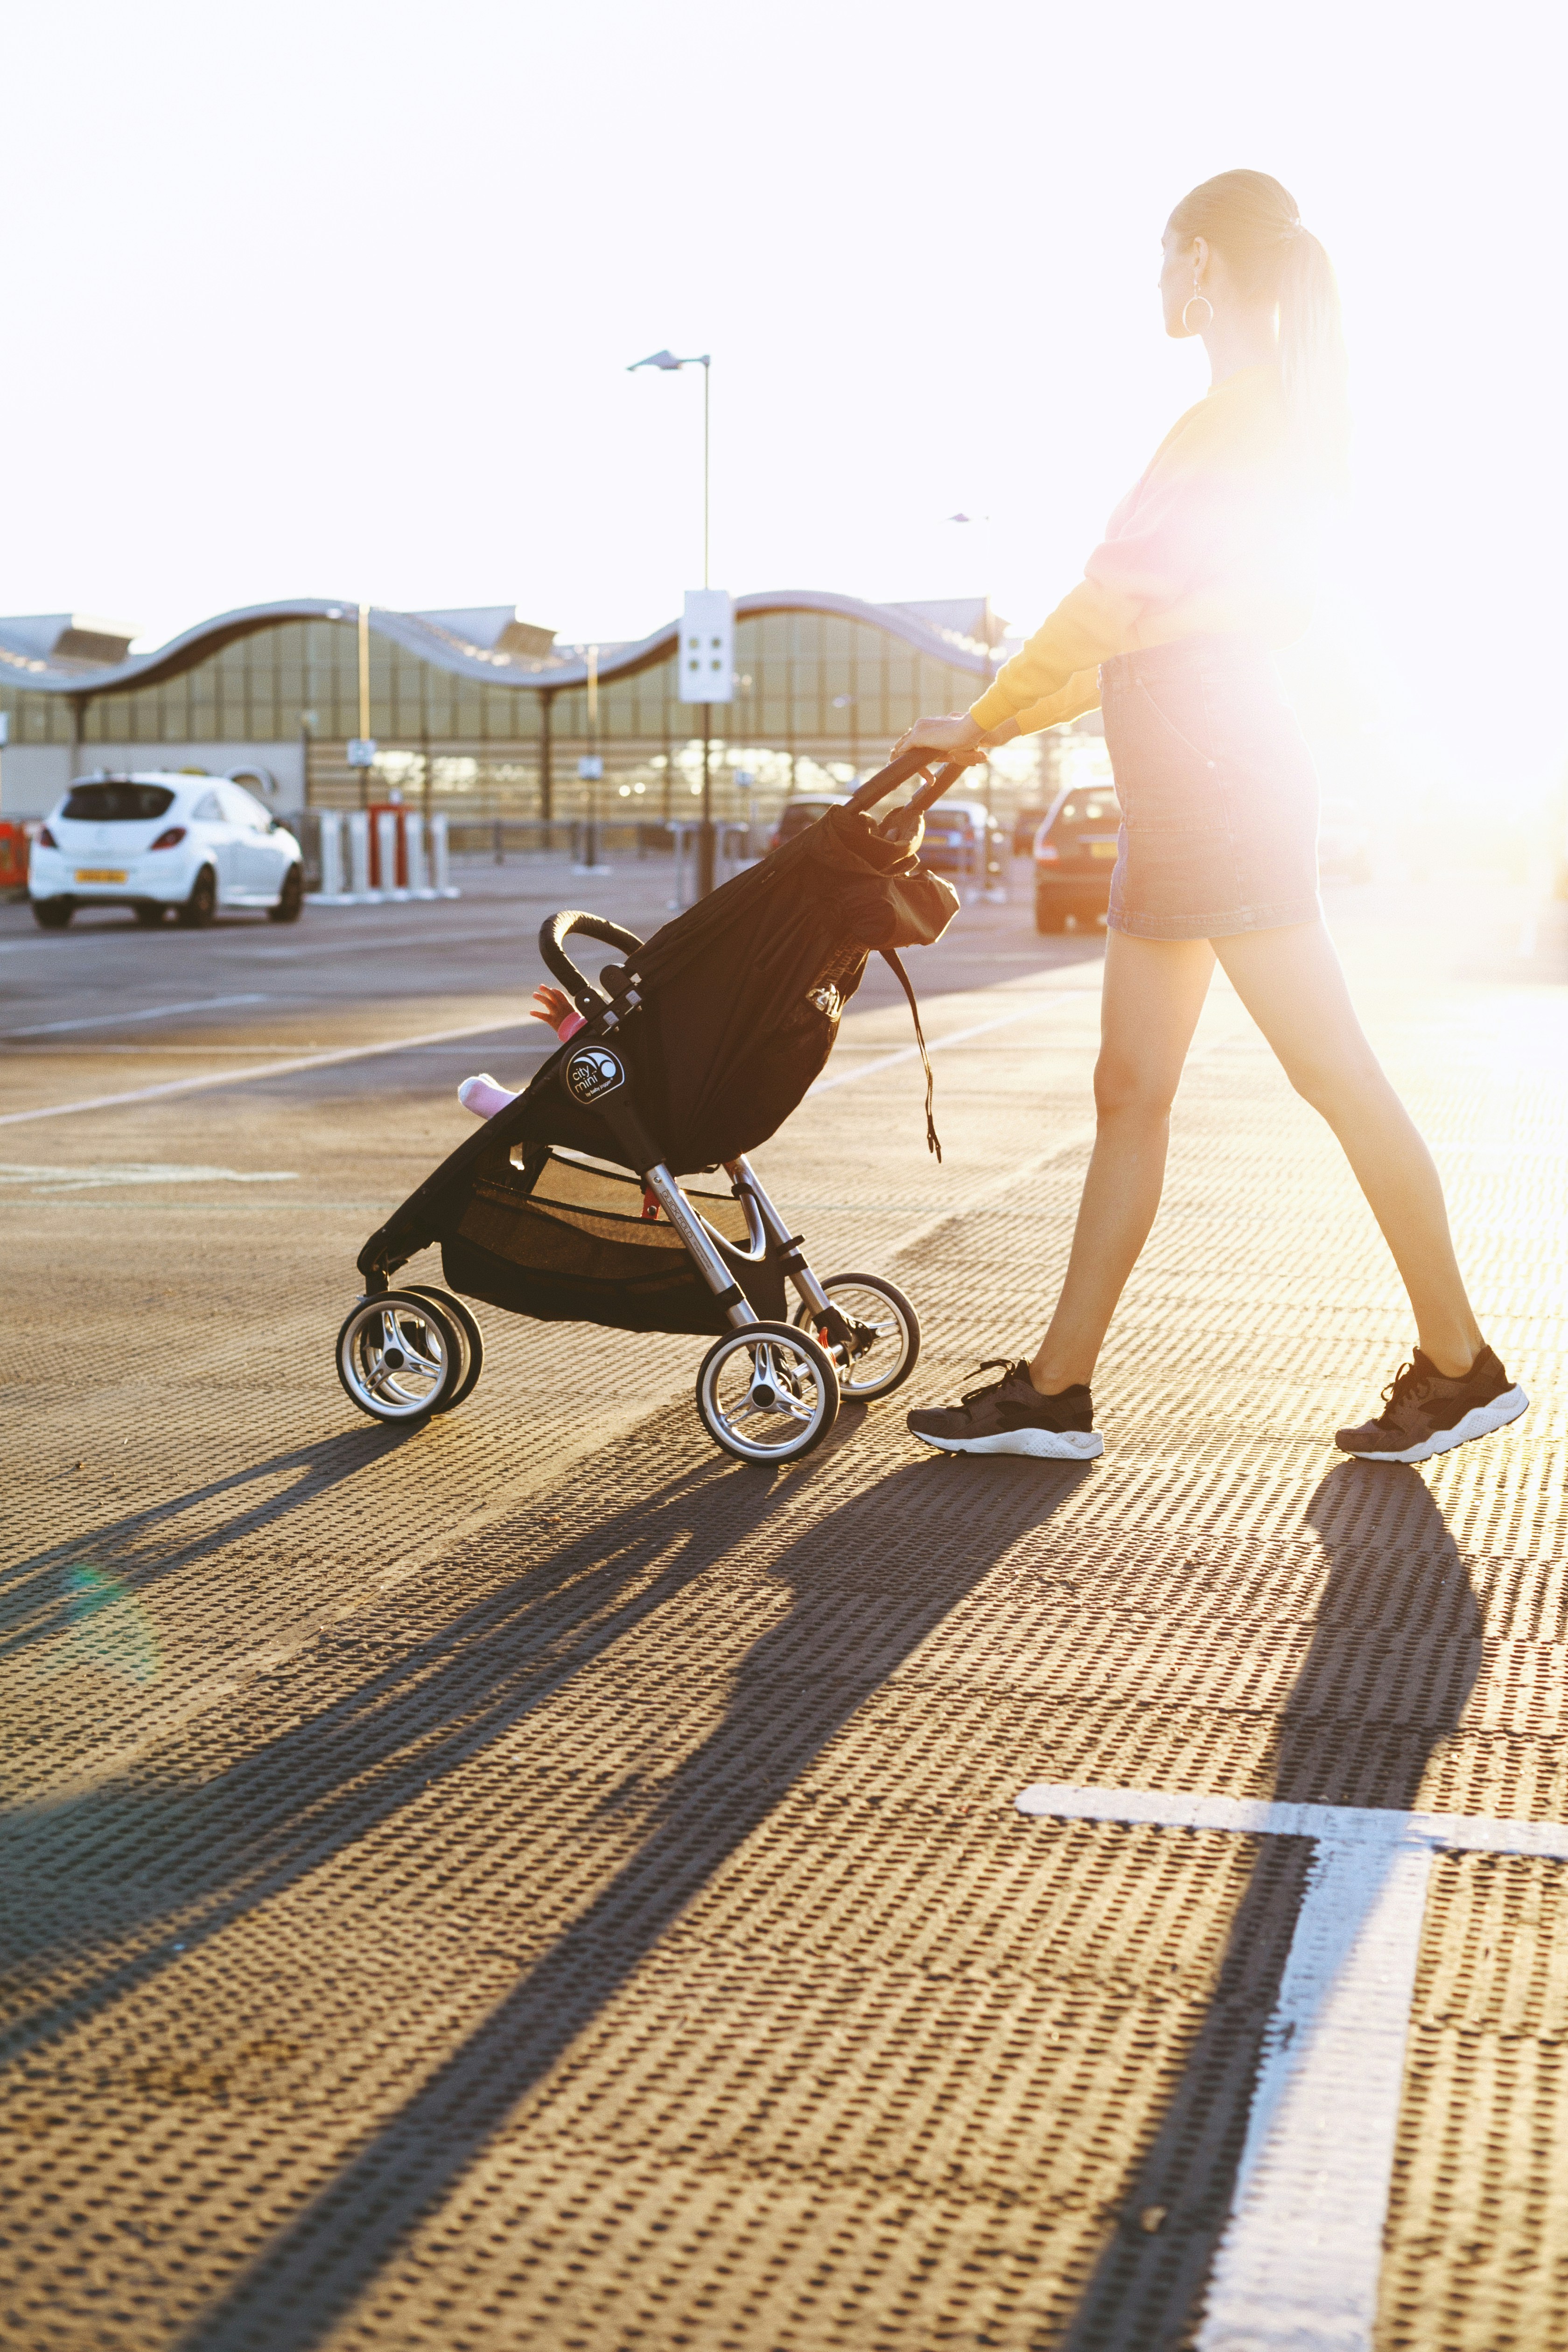 Whats The Weight Limit Of A Stroller And For How Long Can A Child Use It?